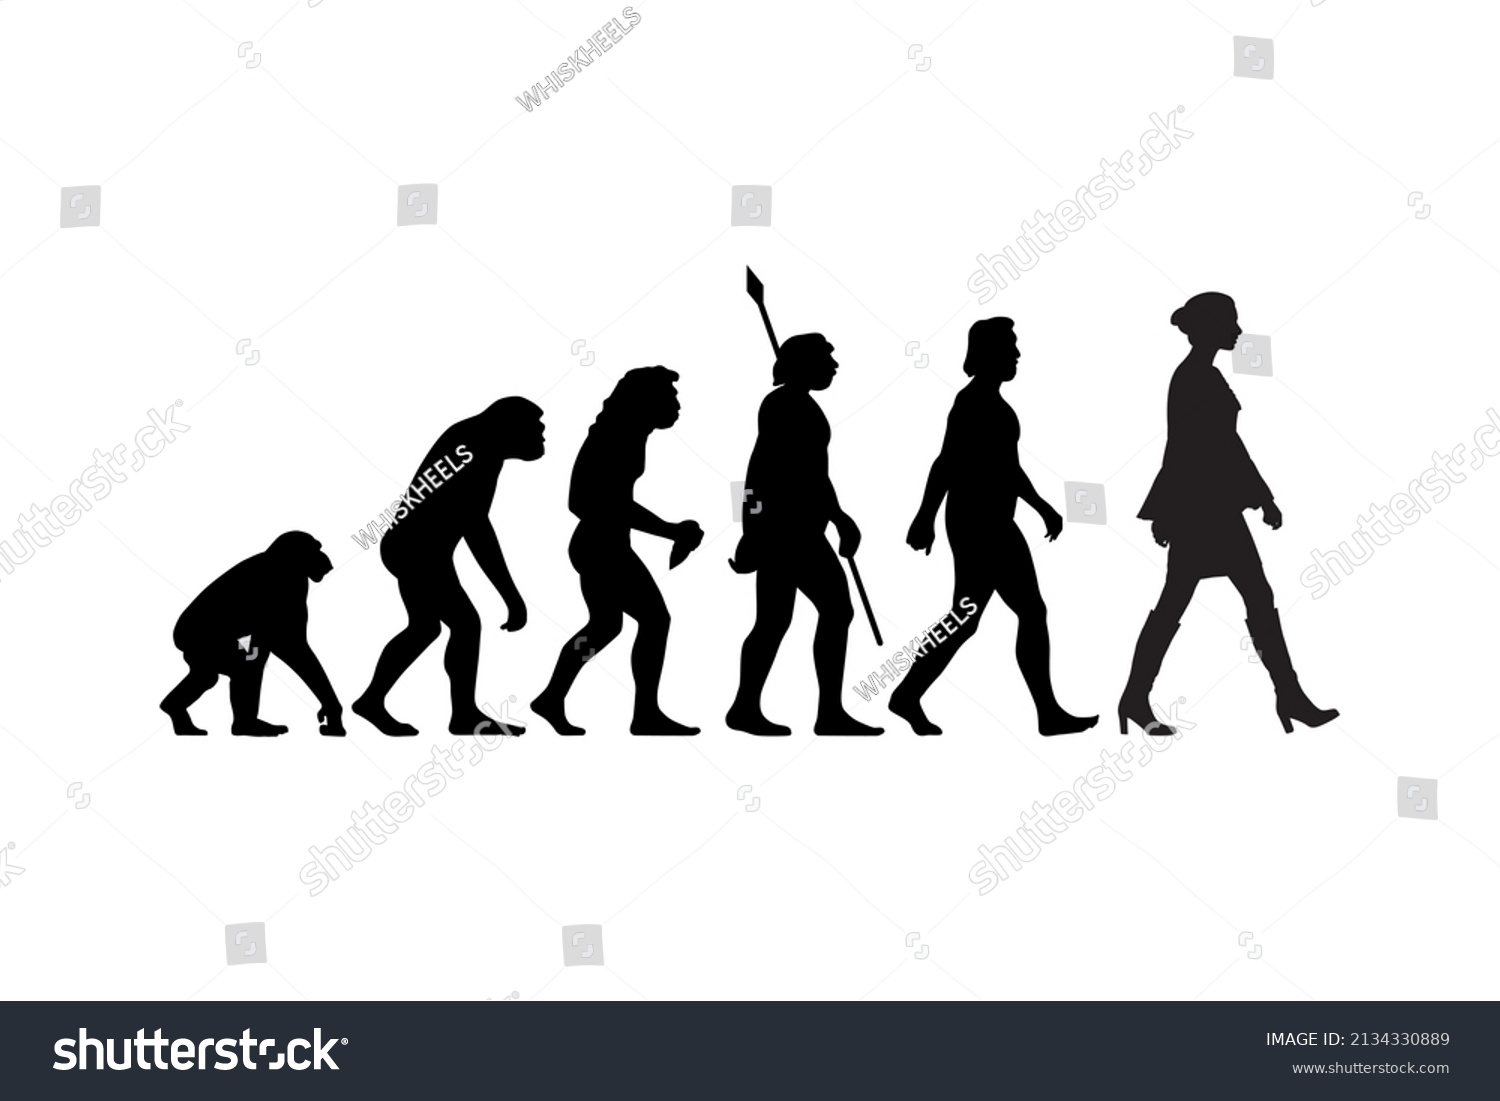 SVG of Theory of evolution of man silhouette from ape to woman. Vector illustration svg